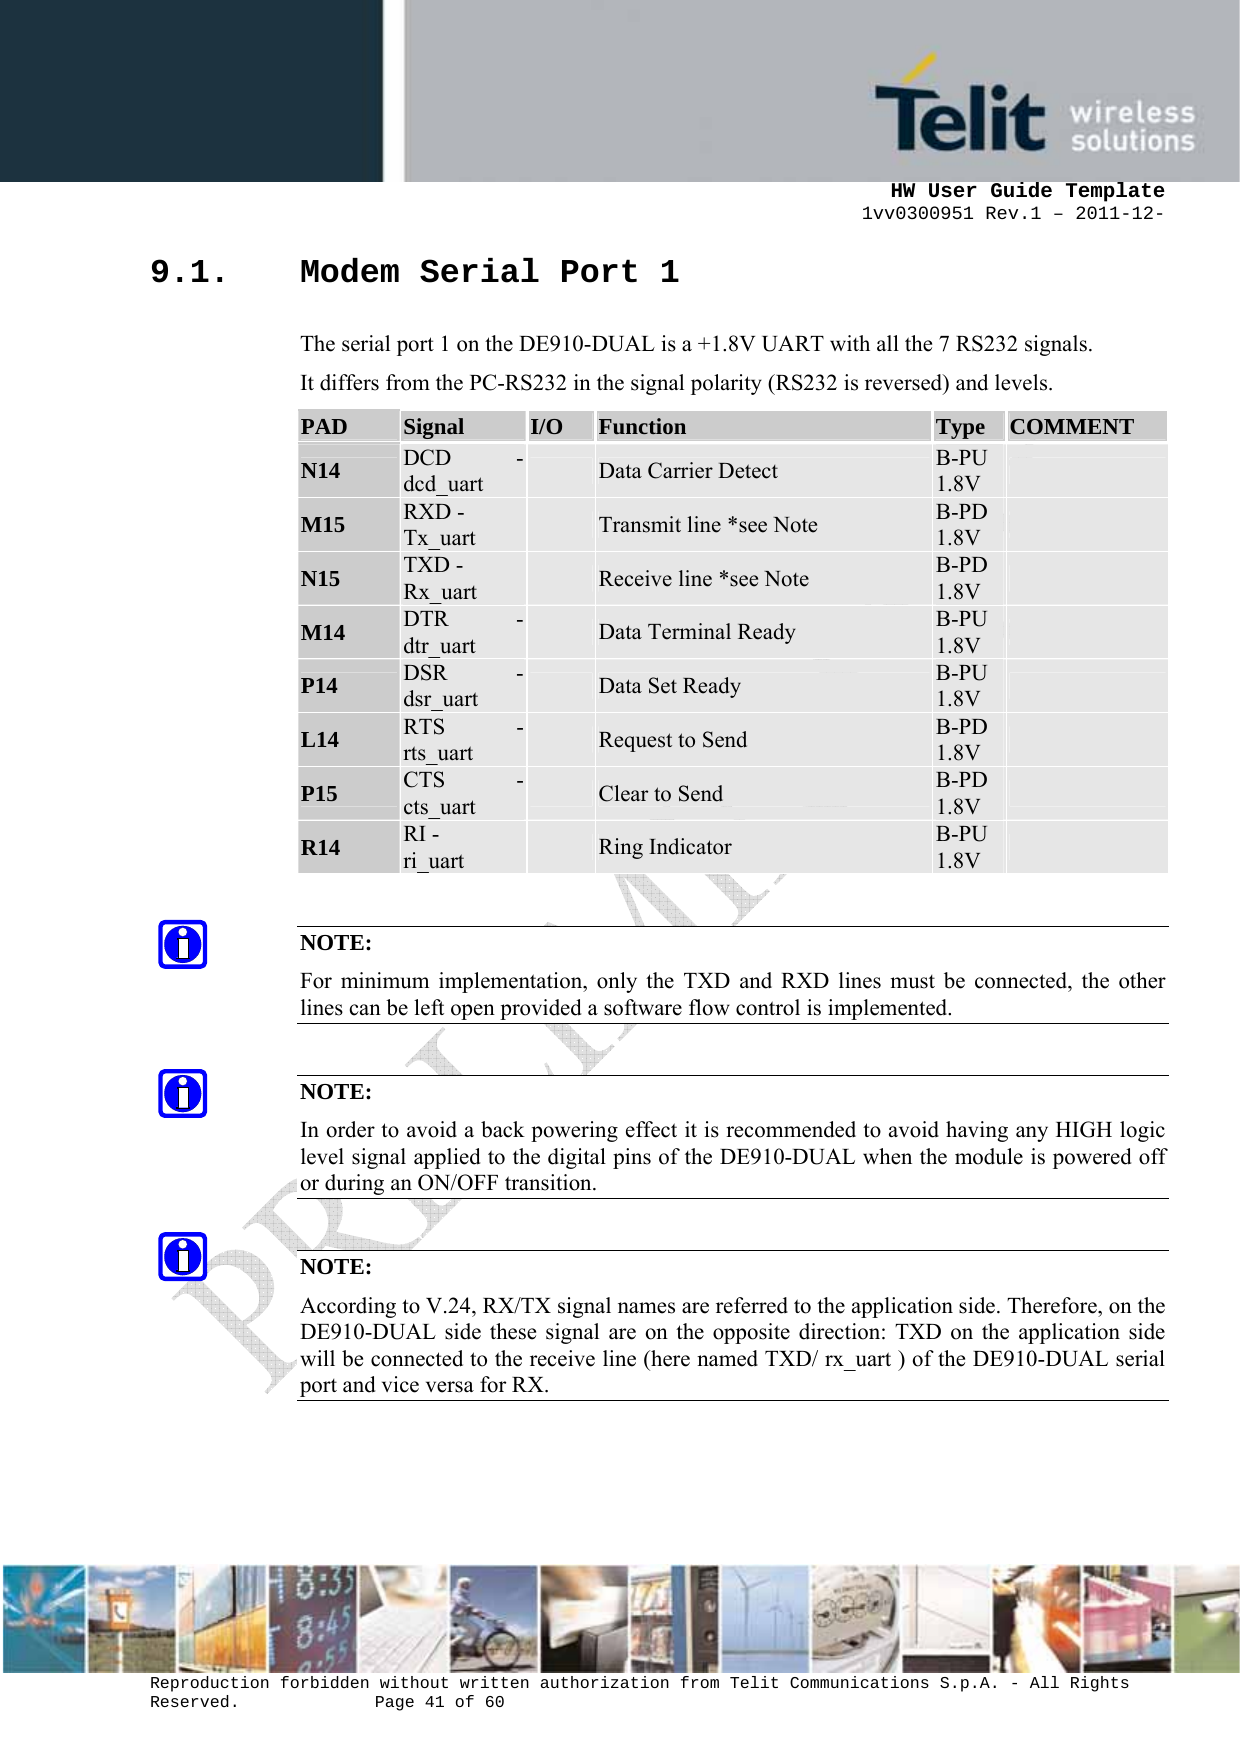      HW User Guide Template 1vv0300951 Rev.1 – 2011-12-  Reproduction forbidden without written authorization from Telit Communications S.p.A. - All Rights Reserved.    Page 41 of 60                                                     9.1. Modem Serial Port 1 The serial port 1 on the DE910-DUAL is a +1.8V UART with all the 7 RS232 signals.  It differs from the PC-RS232 in the signal polarity (RS232 is reversed) and levels. PAD  Signal  I/O  Function  Type  COMMENT N14  DCD -dcd_uart   Data Carrier Detect  B-PU 1.8V   M15  RXD - Tx_uart   Transmit line *see Note  B-PD 1.8V   N15  TXD - Rx_uart   Receive line *see Note  B-PD 1.8V   M14  DTR -dtr_uart   Data Terminal Ready  B-PU 1.8V   P14  DSR -dsr_uart   Data Set Ready  B-PU 1.8V   L14  RTS -rts_uart   Request to Send  B-PD 1.8V   P15  CTS -cts_uart   Clear to Send  B-PD 1.8V   R14  RI - ri_uart   Ring Indicator  B-PU 1.8V    NOTE: For minimum implementation, only the TXD and RXD lines must be connected, the other lines can be left open provided a software flow control is implemented.  NOTE: In order to avoid a back powering effect it is recommended to avoid having any HIGH logic level signal applied to the digital pins of the DE910-DUAL when the module is powered off or during an ON/OFF transition.  NOTE: According to V.24, RX/TX signal names are referred to the application side. Therefore, on the DE910-DUAL side these signal are on the opposite direction: TXD on the application side will be connected to the receive line (here named TXD/ rx_uart ) of the DE910-DUAL serial port and vice versa for RX.    